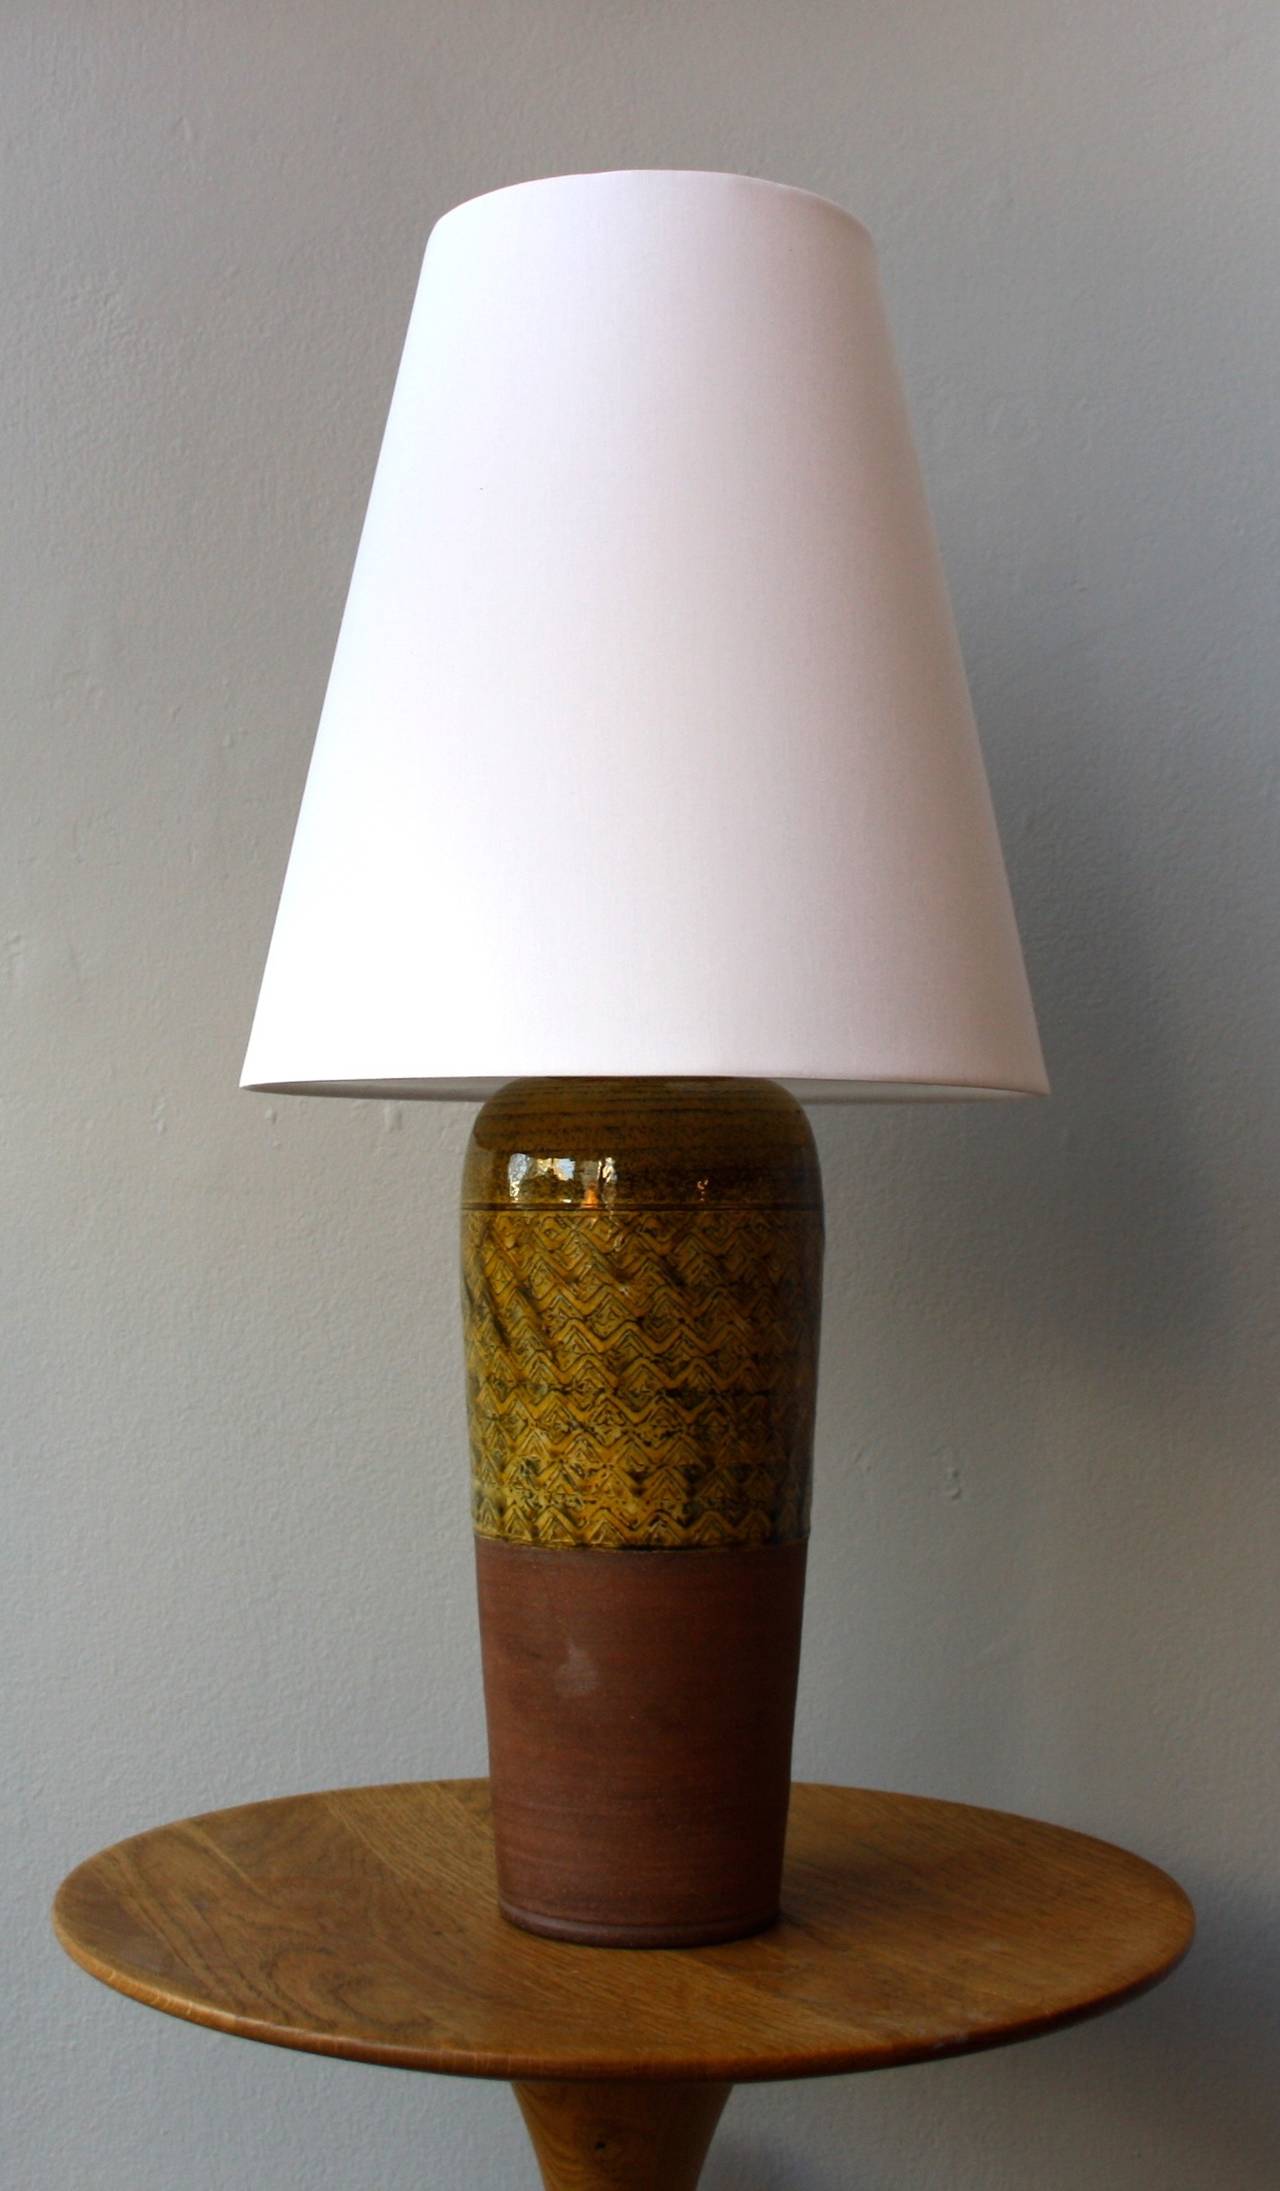 Herman Kahler's workshop. Great hand-thrown table lamp with the upper part wonderfully covered by a yellowish textured glaze. The lower part unglazed bears the warm brown colour of earthenware. Topped by a new white cotton shade.